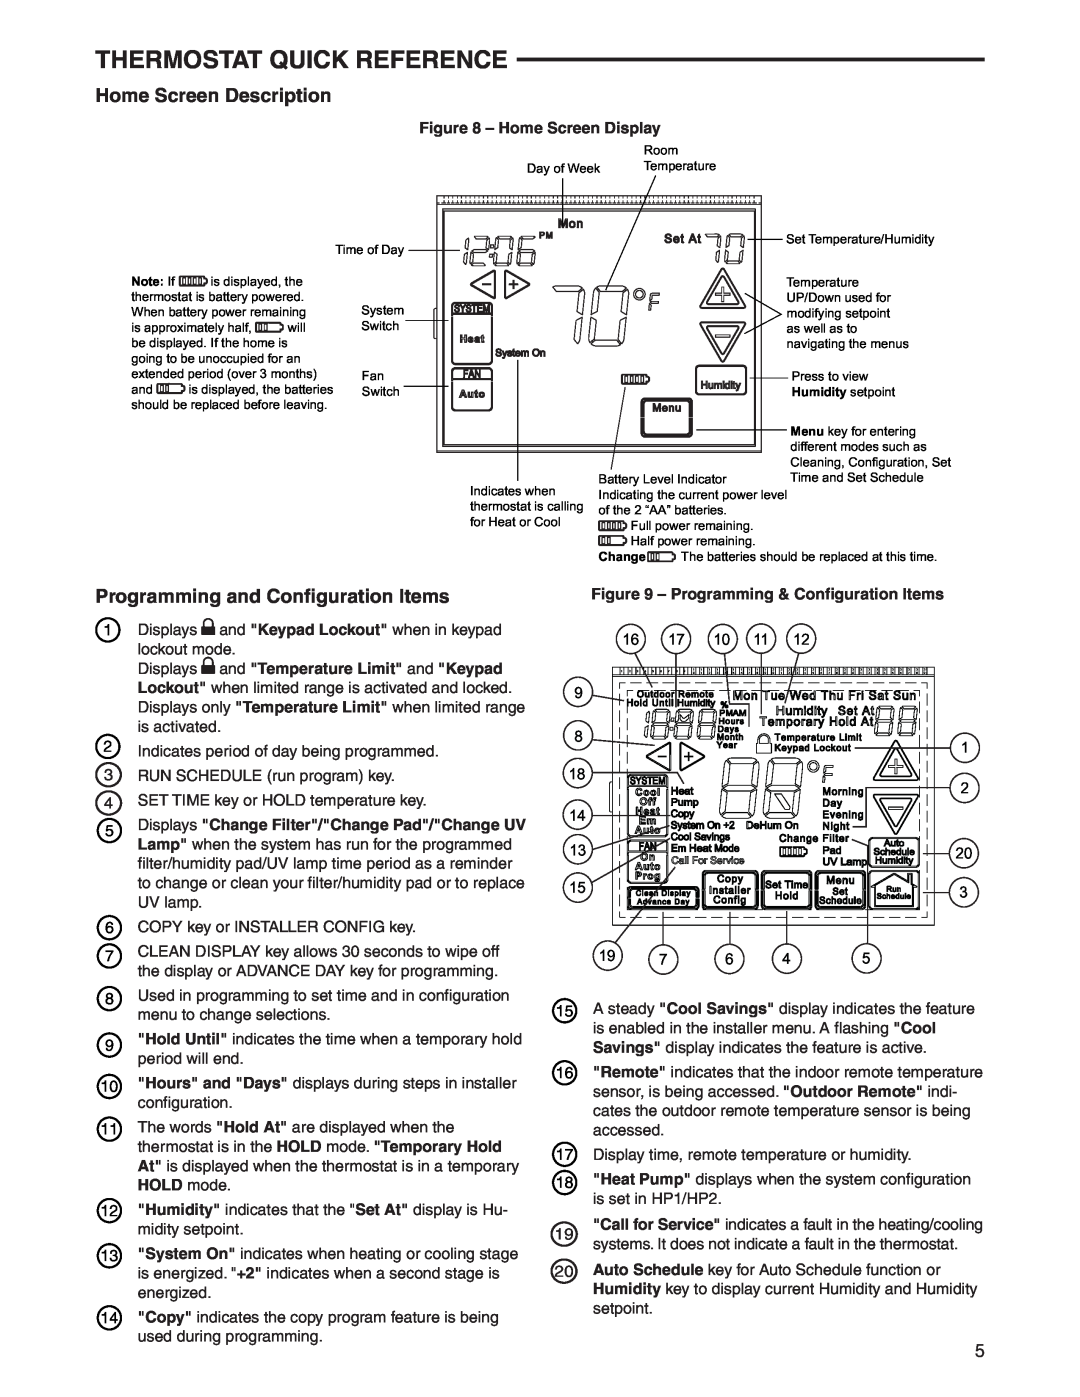 White Rodgers 1F95-1291 Thermostat Quick Reference, Home Screen Description, Programming and Conﬁguration Items 